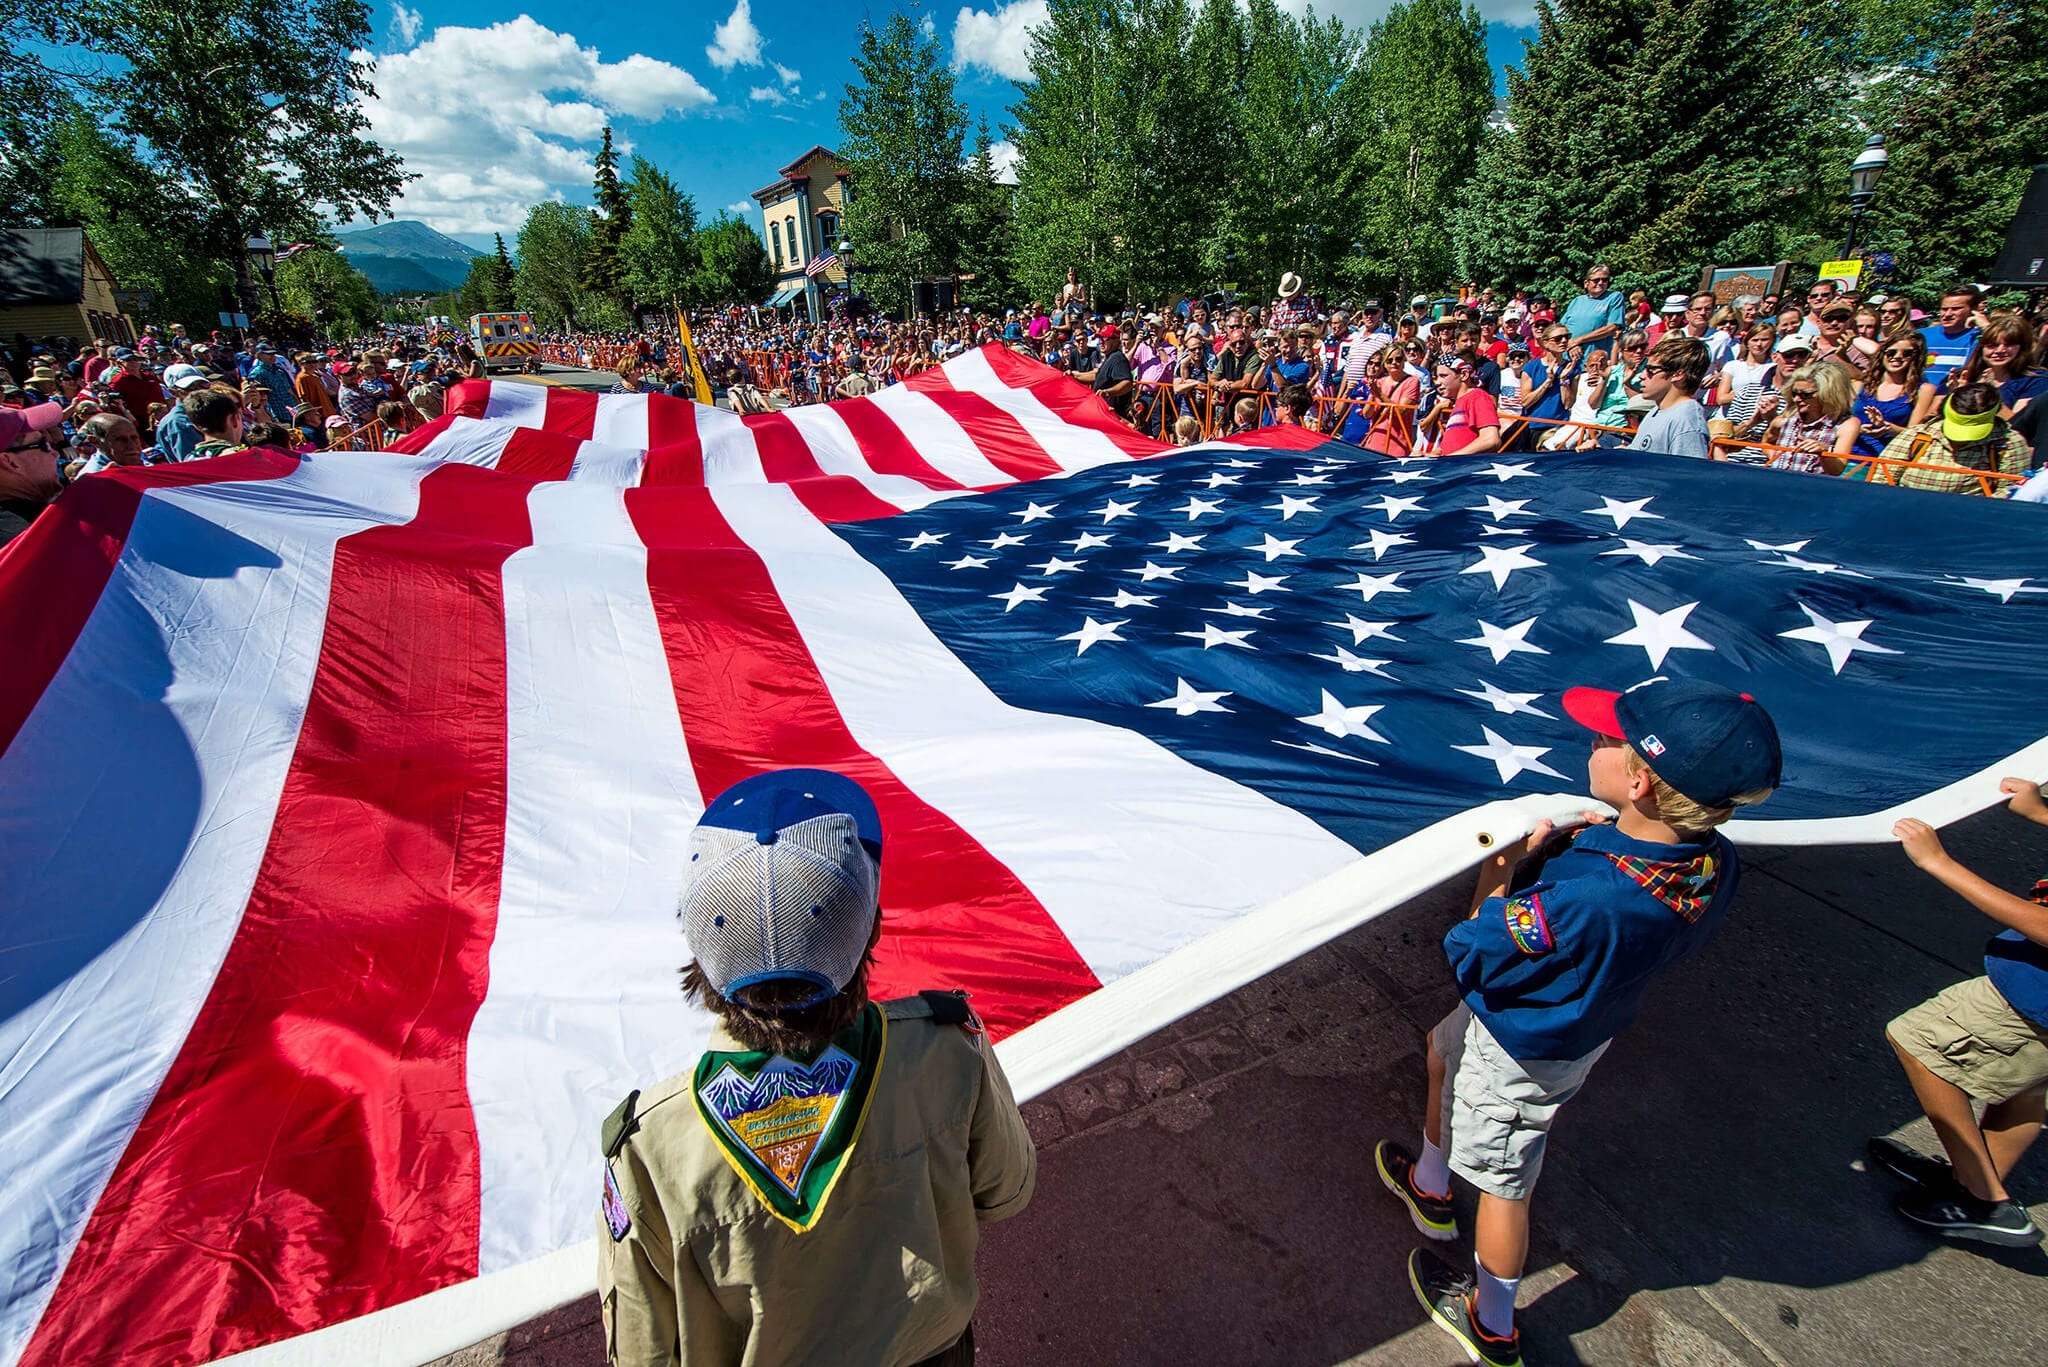 Boys Scouts holding a large flag at the Breckenridge 4th of July Parade